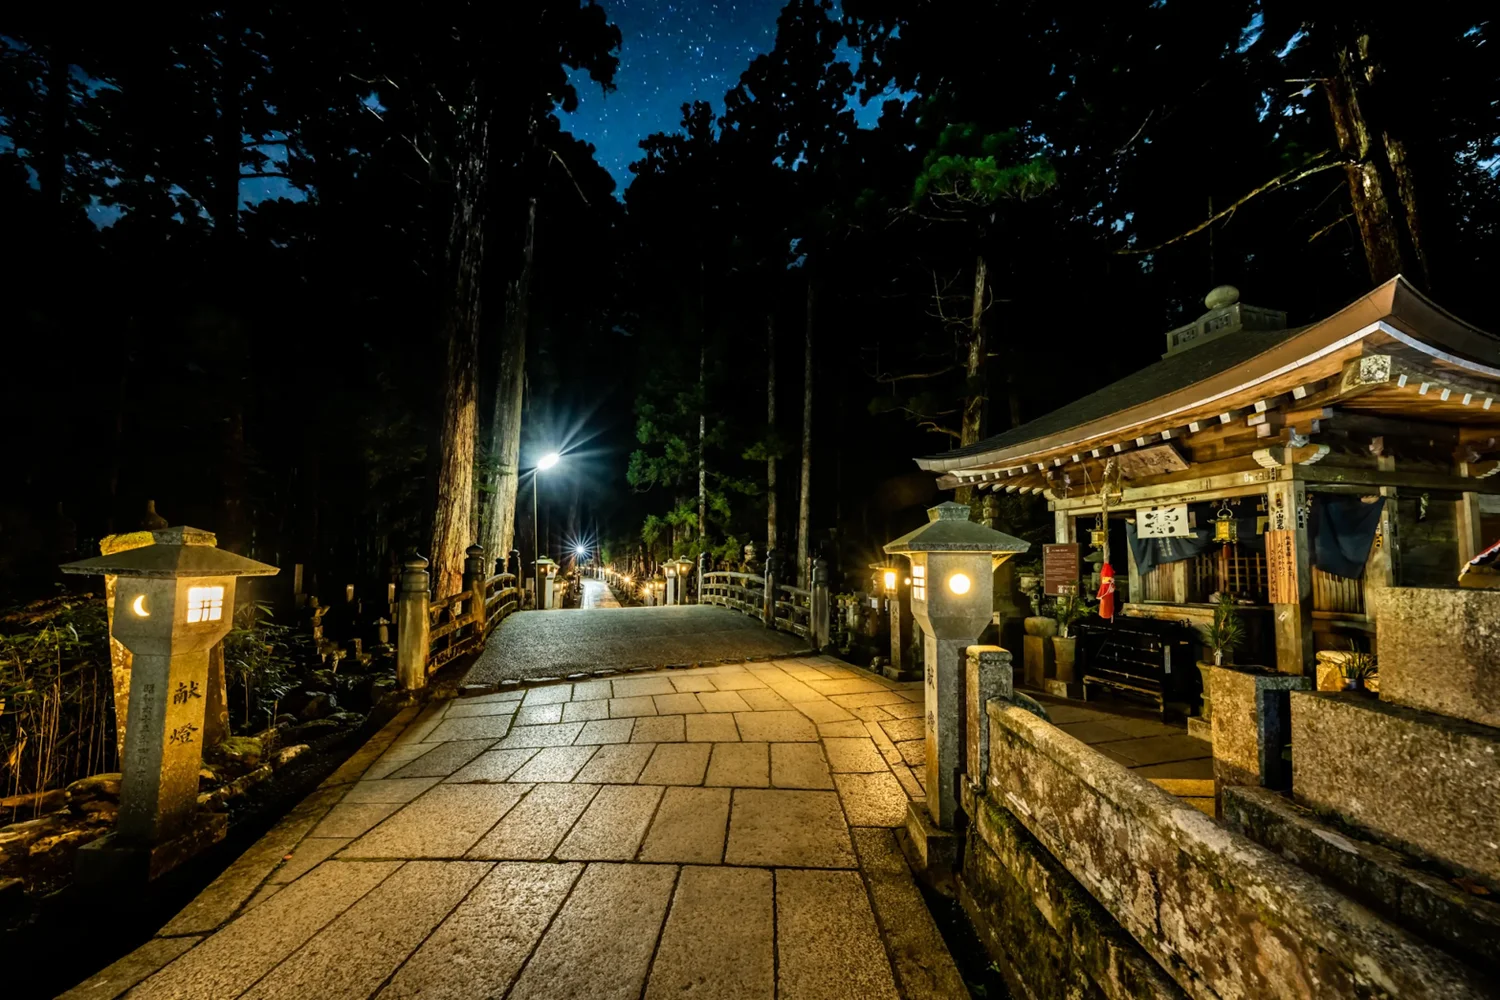 Buddhist Immersion: Spend a Day in the Life of a Monk on Mt. Koya